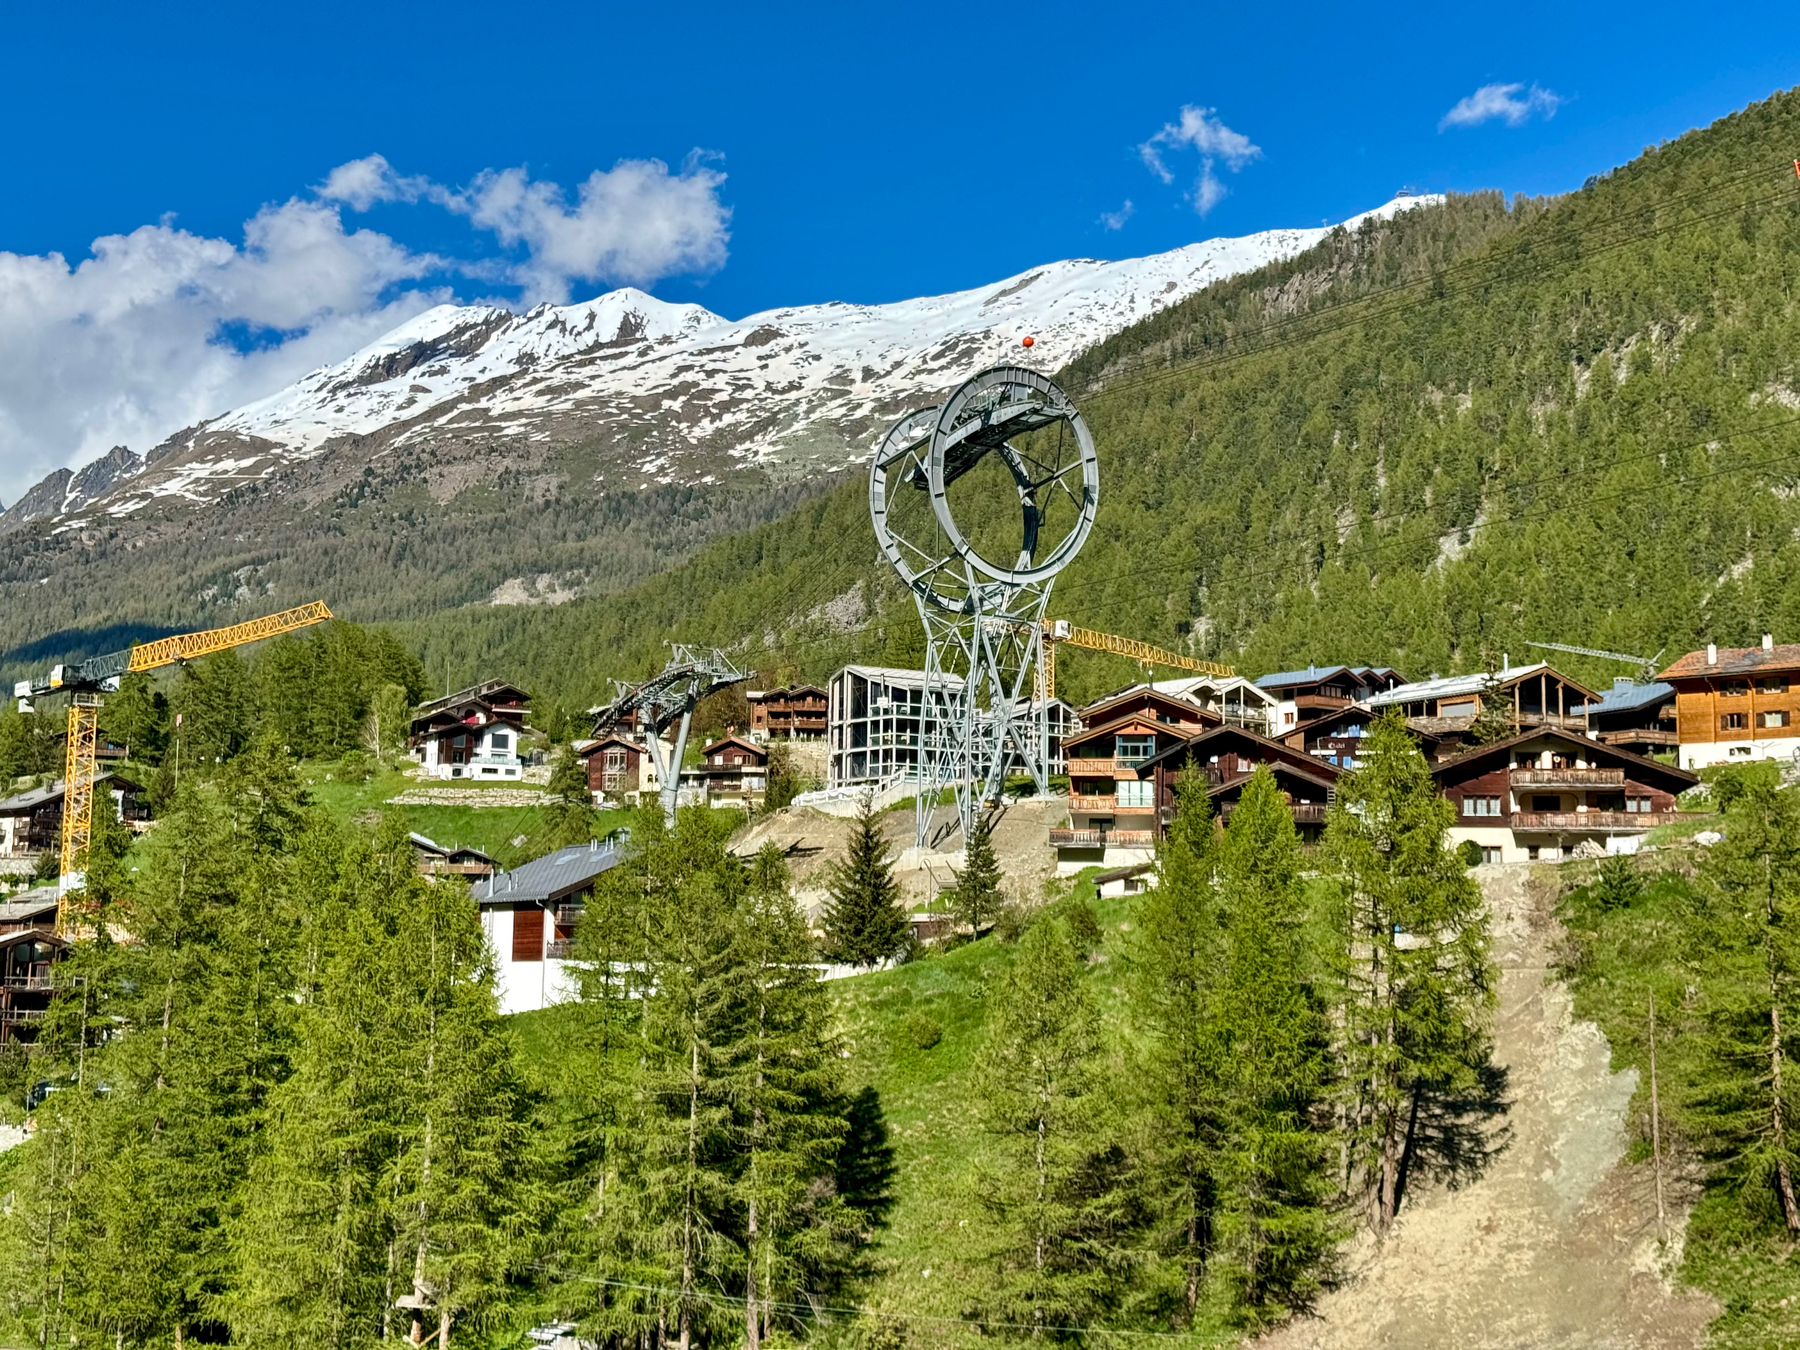 Alpine village with chalet-style buildings, surrounded by forest, with a large metal structure in the foreground and snow-capped mountains in the background.